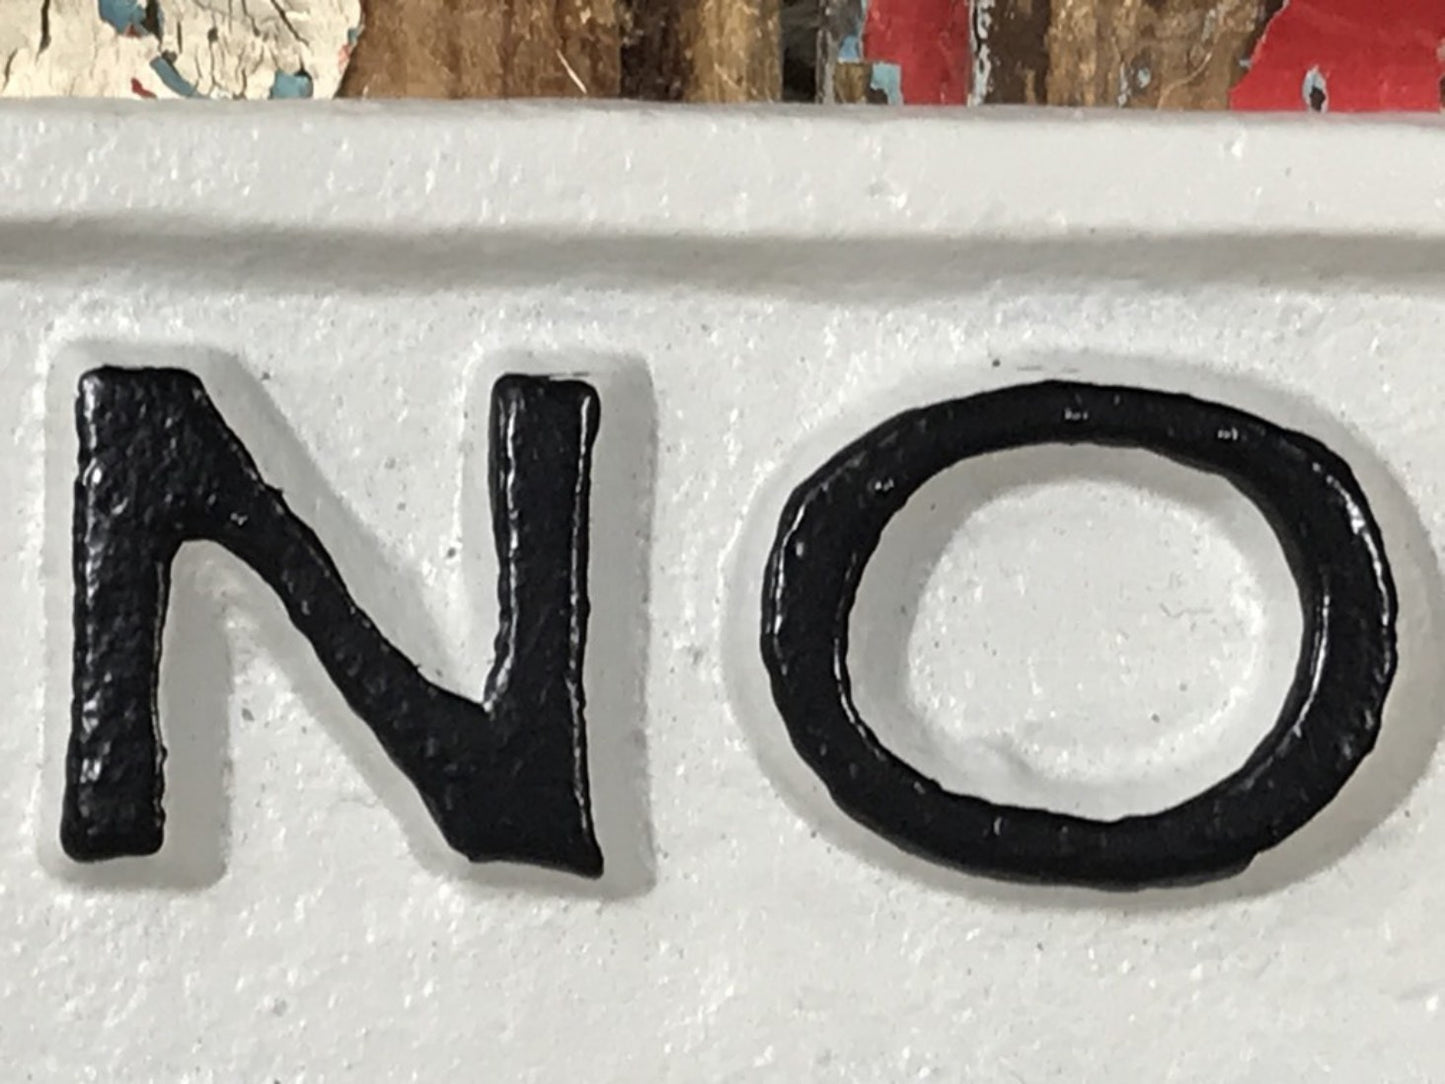 White With Black Text NO STUPID PEOPLE Wall Sign Cast Iron